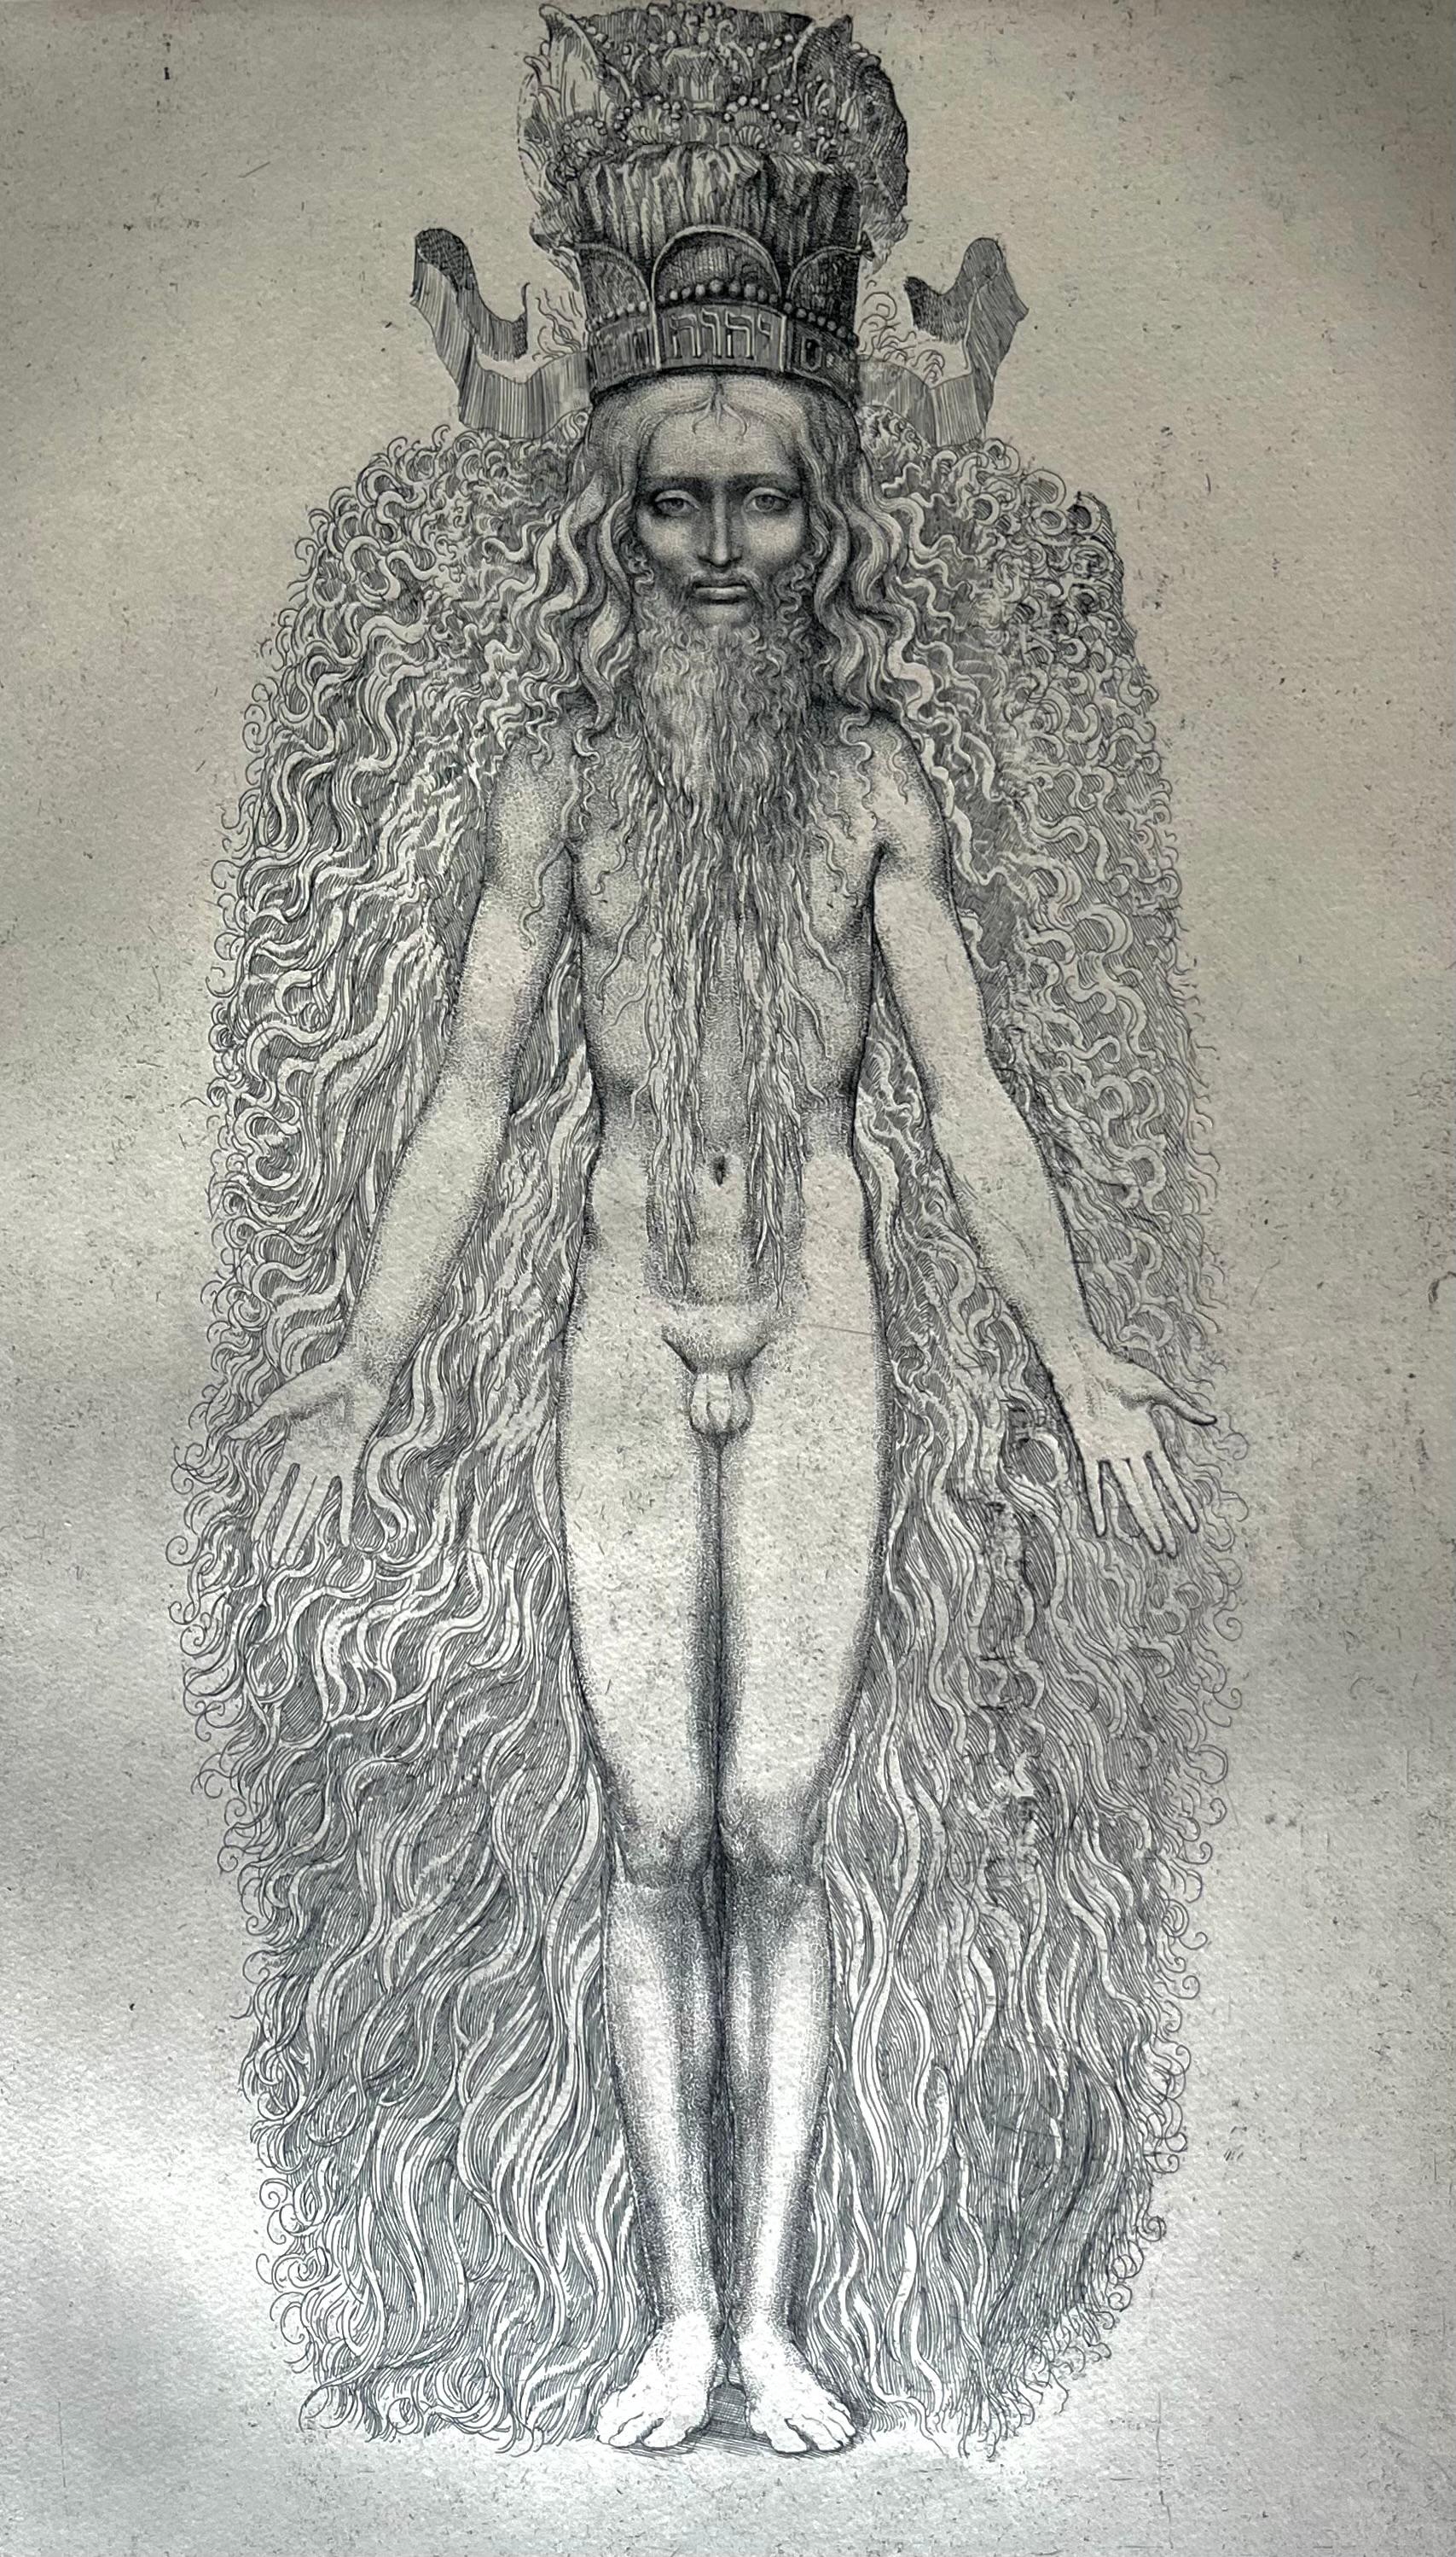 Original engraving #5 by Ernst FUCHS from Kabbalah (THIRTY-TWO PATHS OF WISDOM by SEFER YETZIRA), 1978
Etching signed and numbered 16/30 E.A.
Page size - 30 x 22 in  76 x 56 cm
Image size - 21 x 12.50 in x 53 x 32 cm

This collector's piece, printed